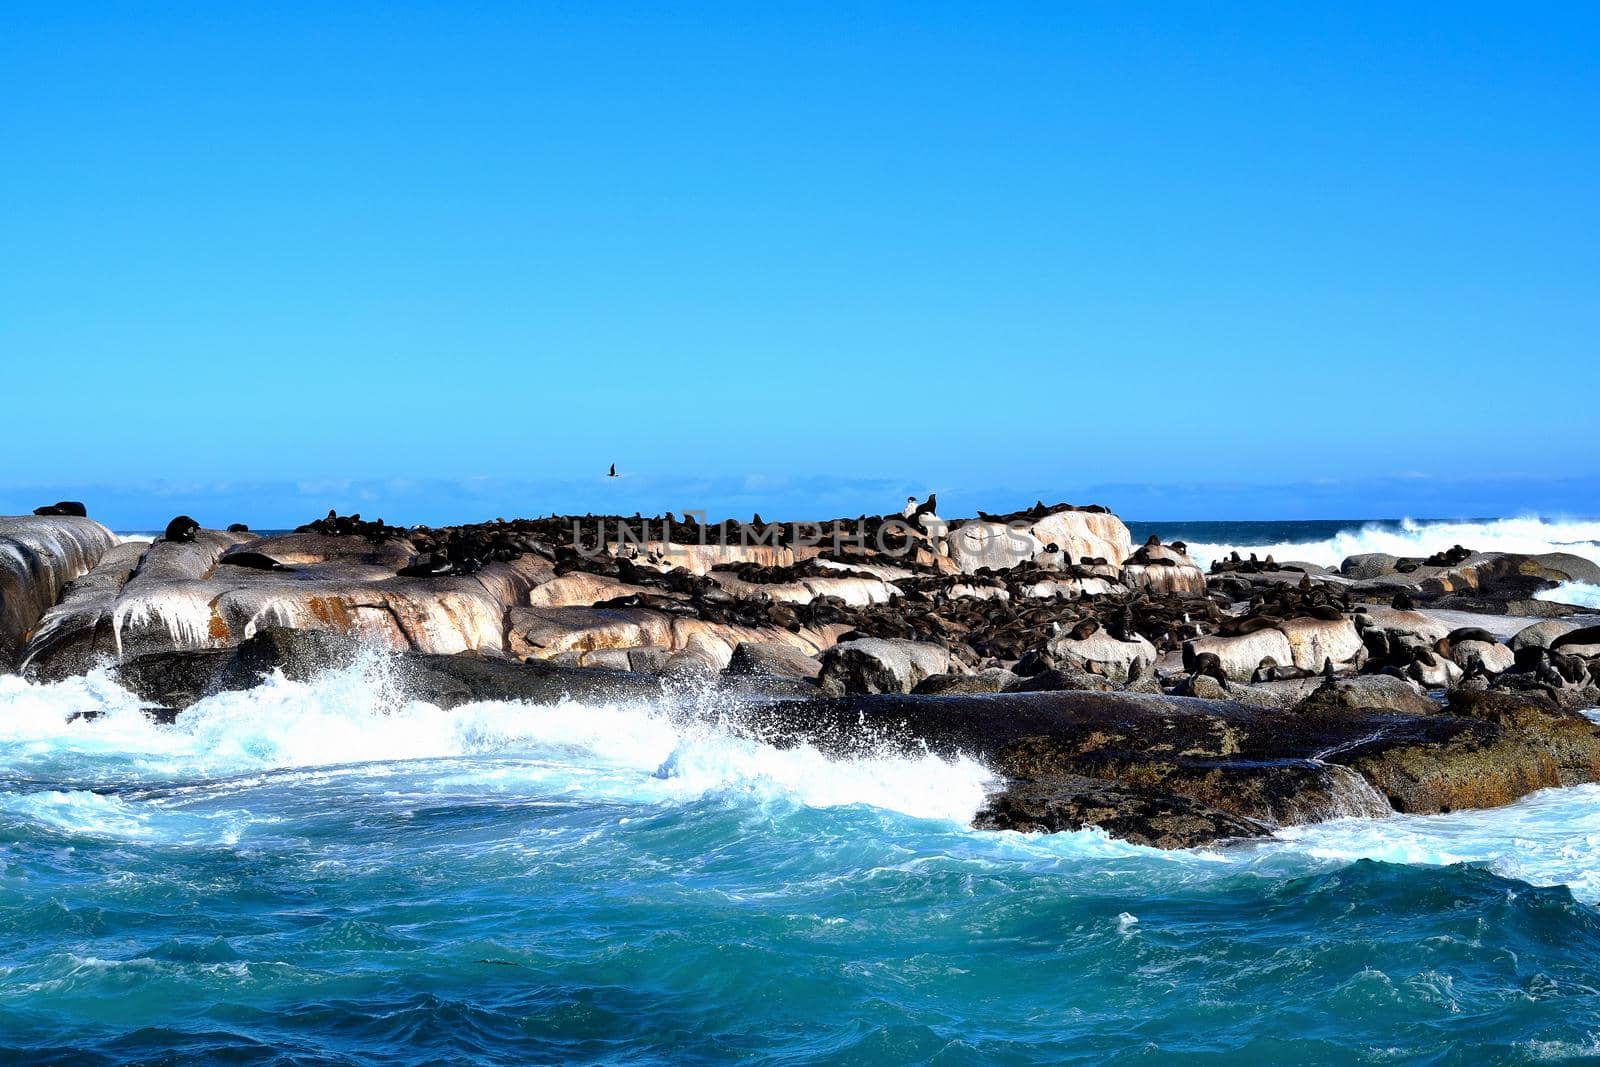 Sealions at Duiker Island by silentstock639